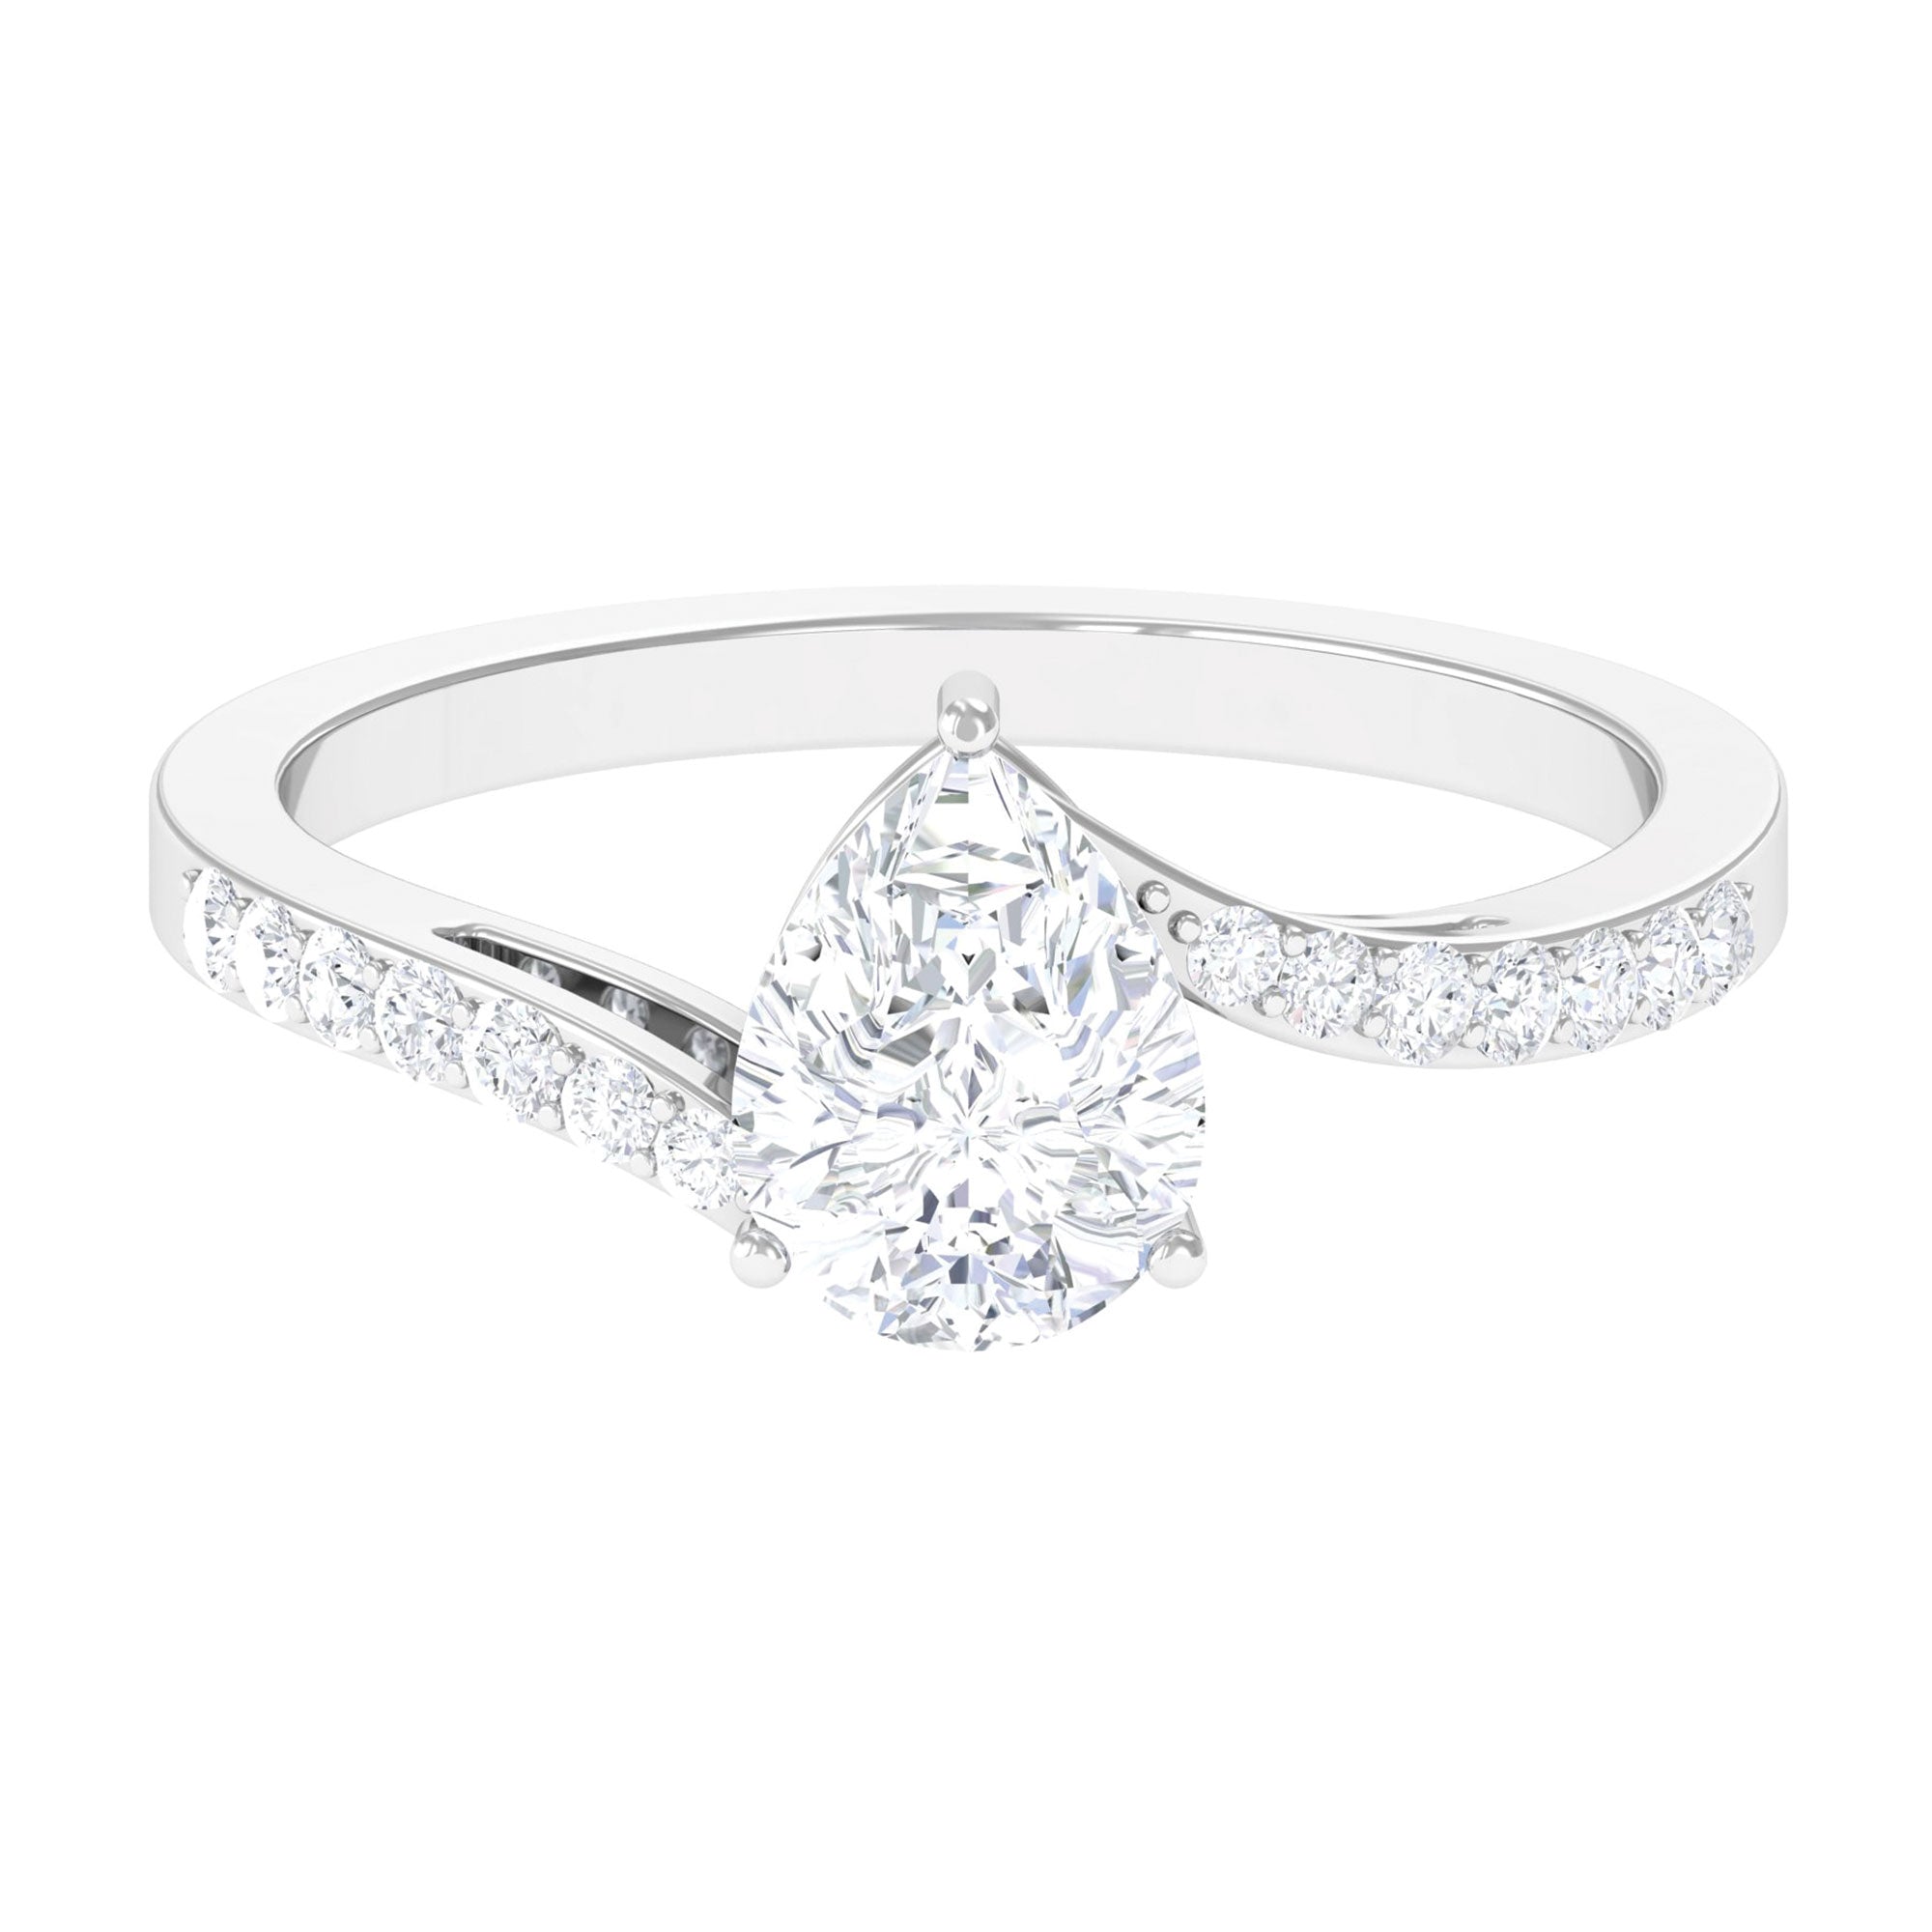 Pear Shape Moissanite Solitaire Bypass Engagement Ring Moissanite - ( D-VS1 ) - Color and Clarity - Rosec Jewels